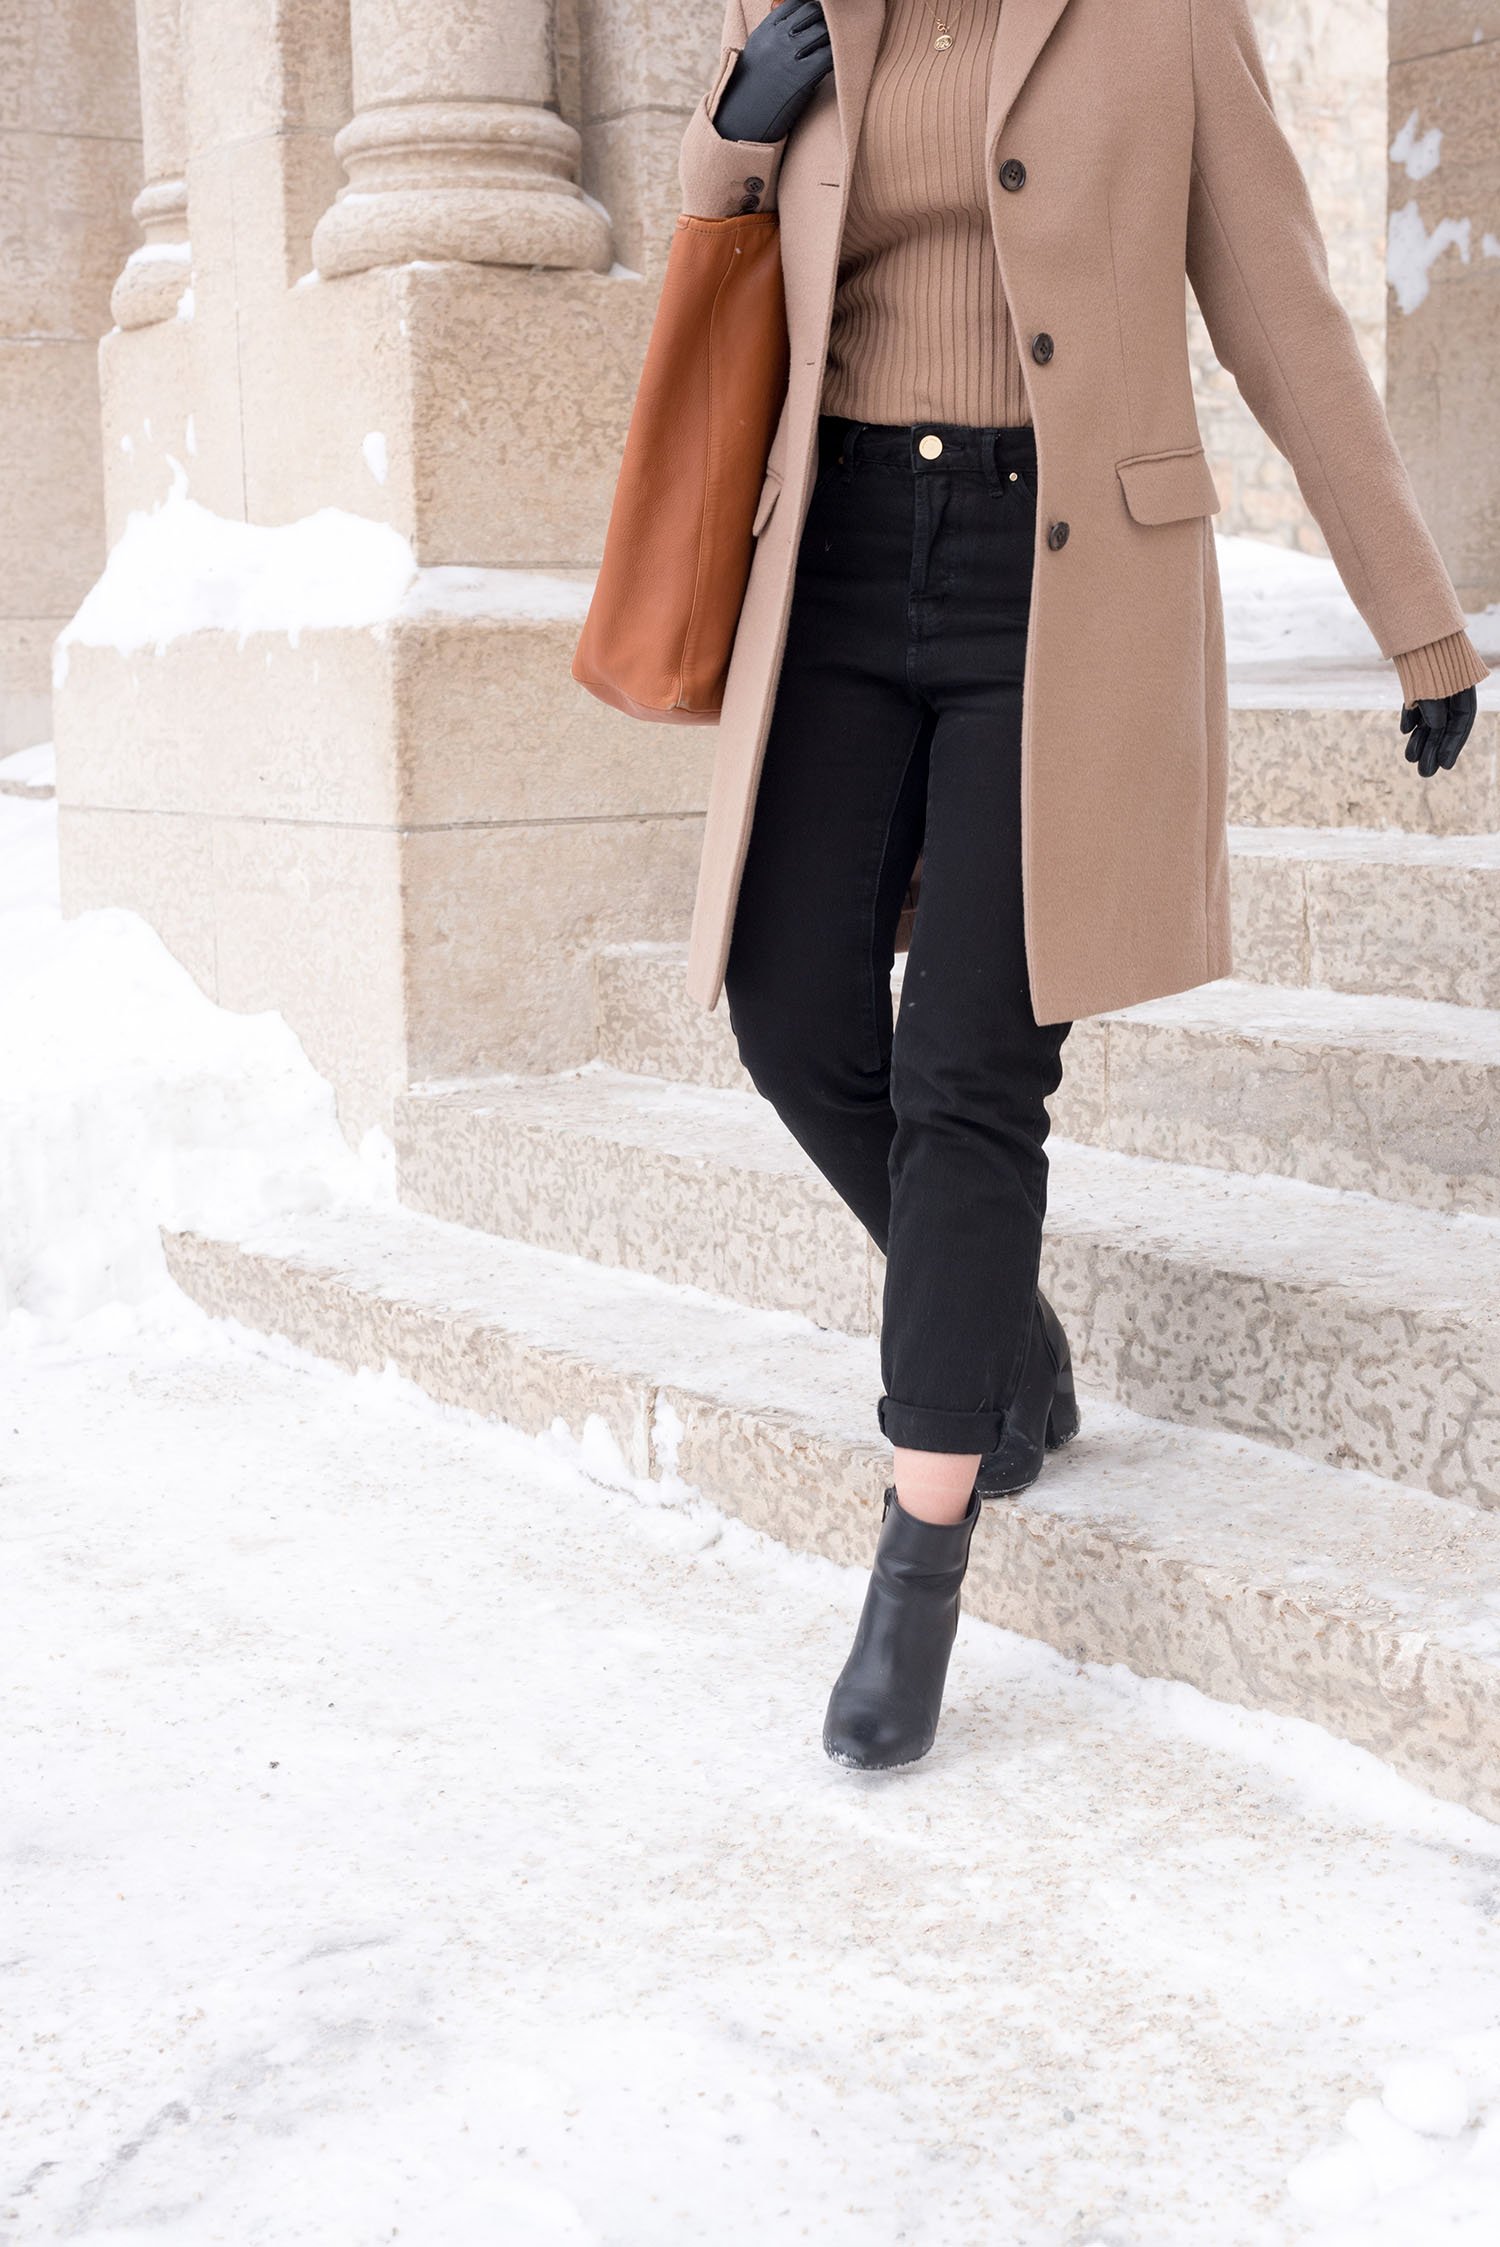 Outfit details on top Canadian fashion blogger Cee Fardoe of Coco & Vera, including Aldo black ankle boots and Sezane 1967 black jeans